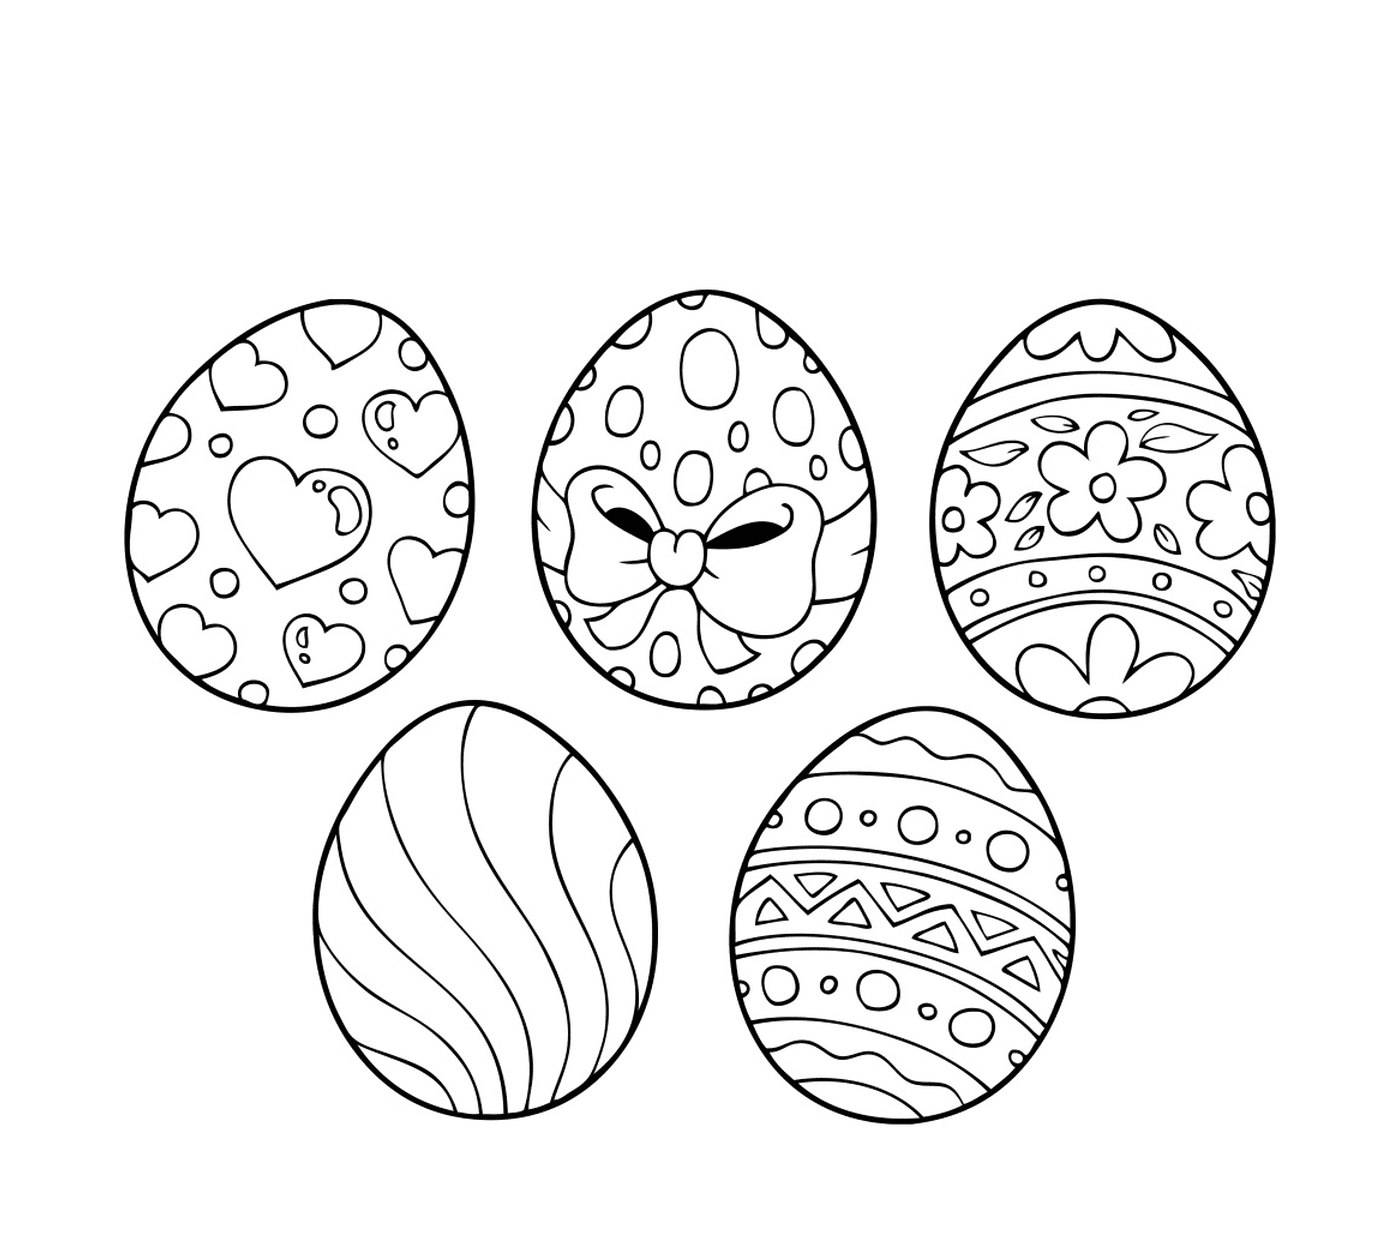  Five Easter eggs decorated 